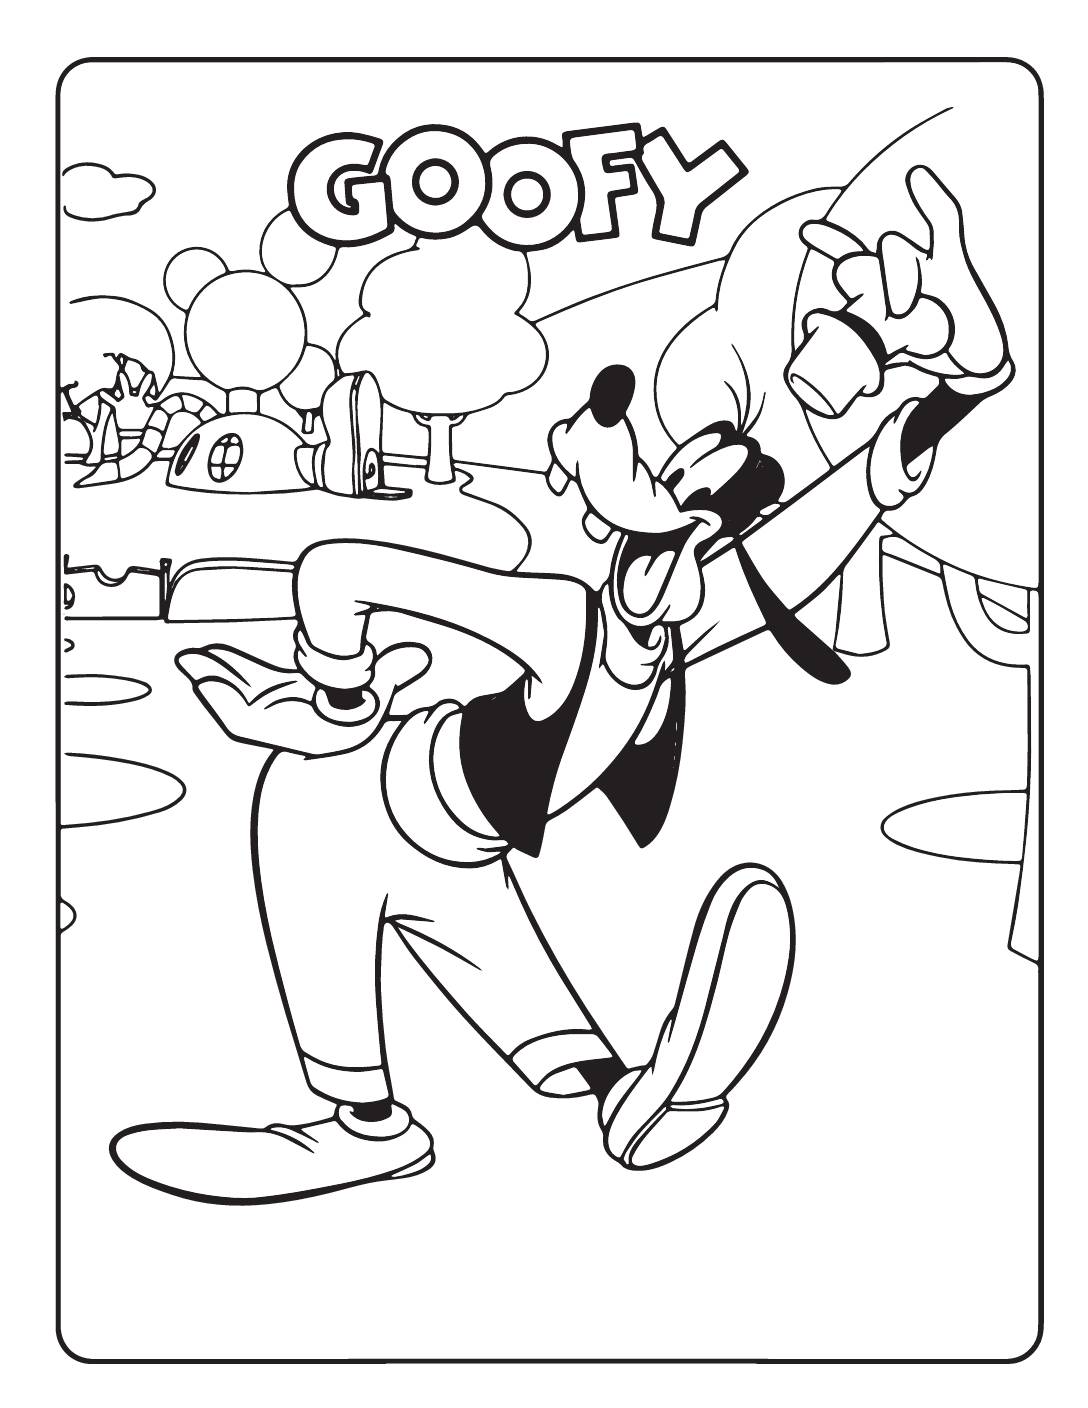 Goofy Coloring Page Coloring Pages